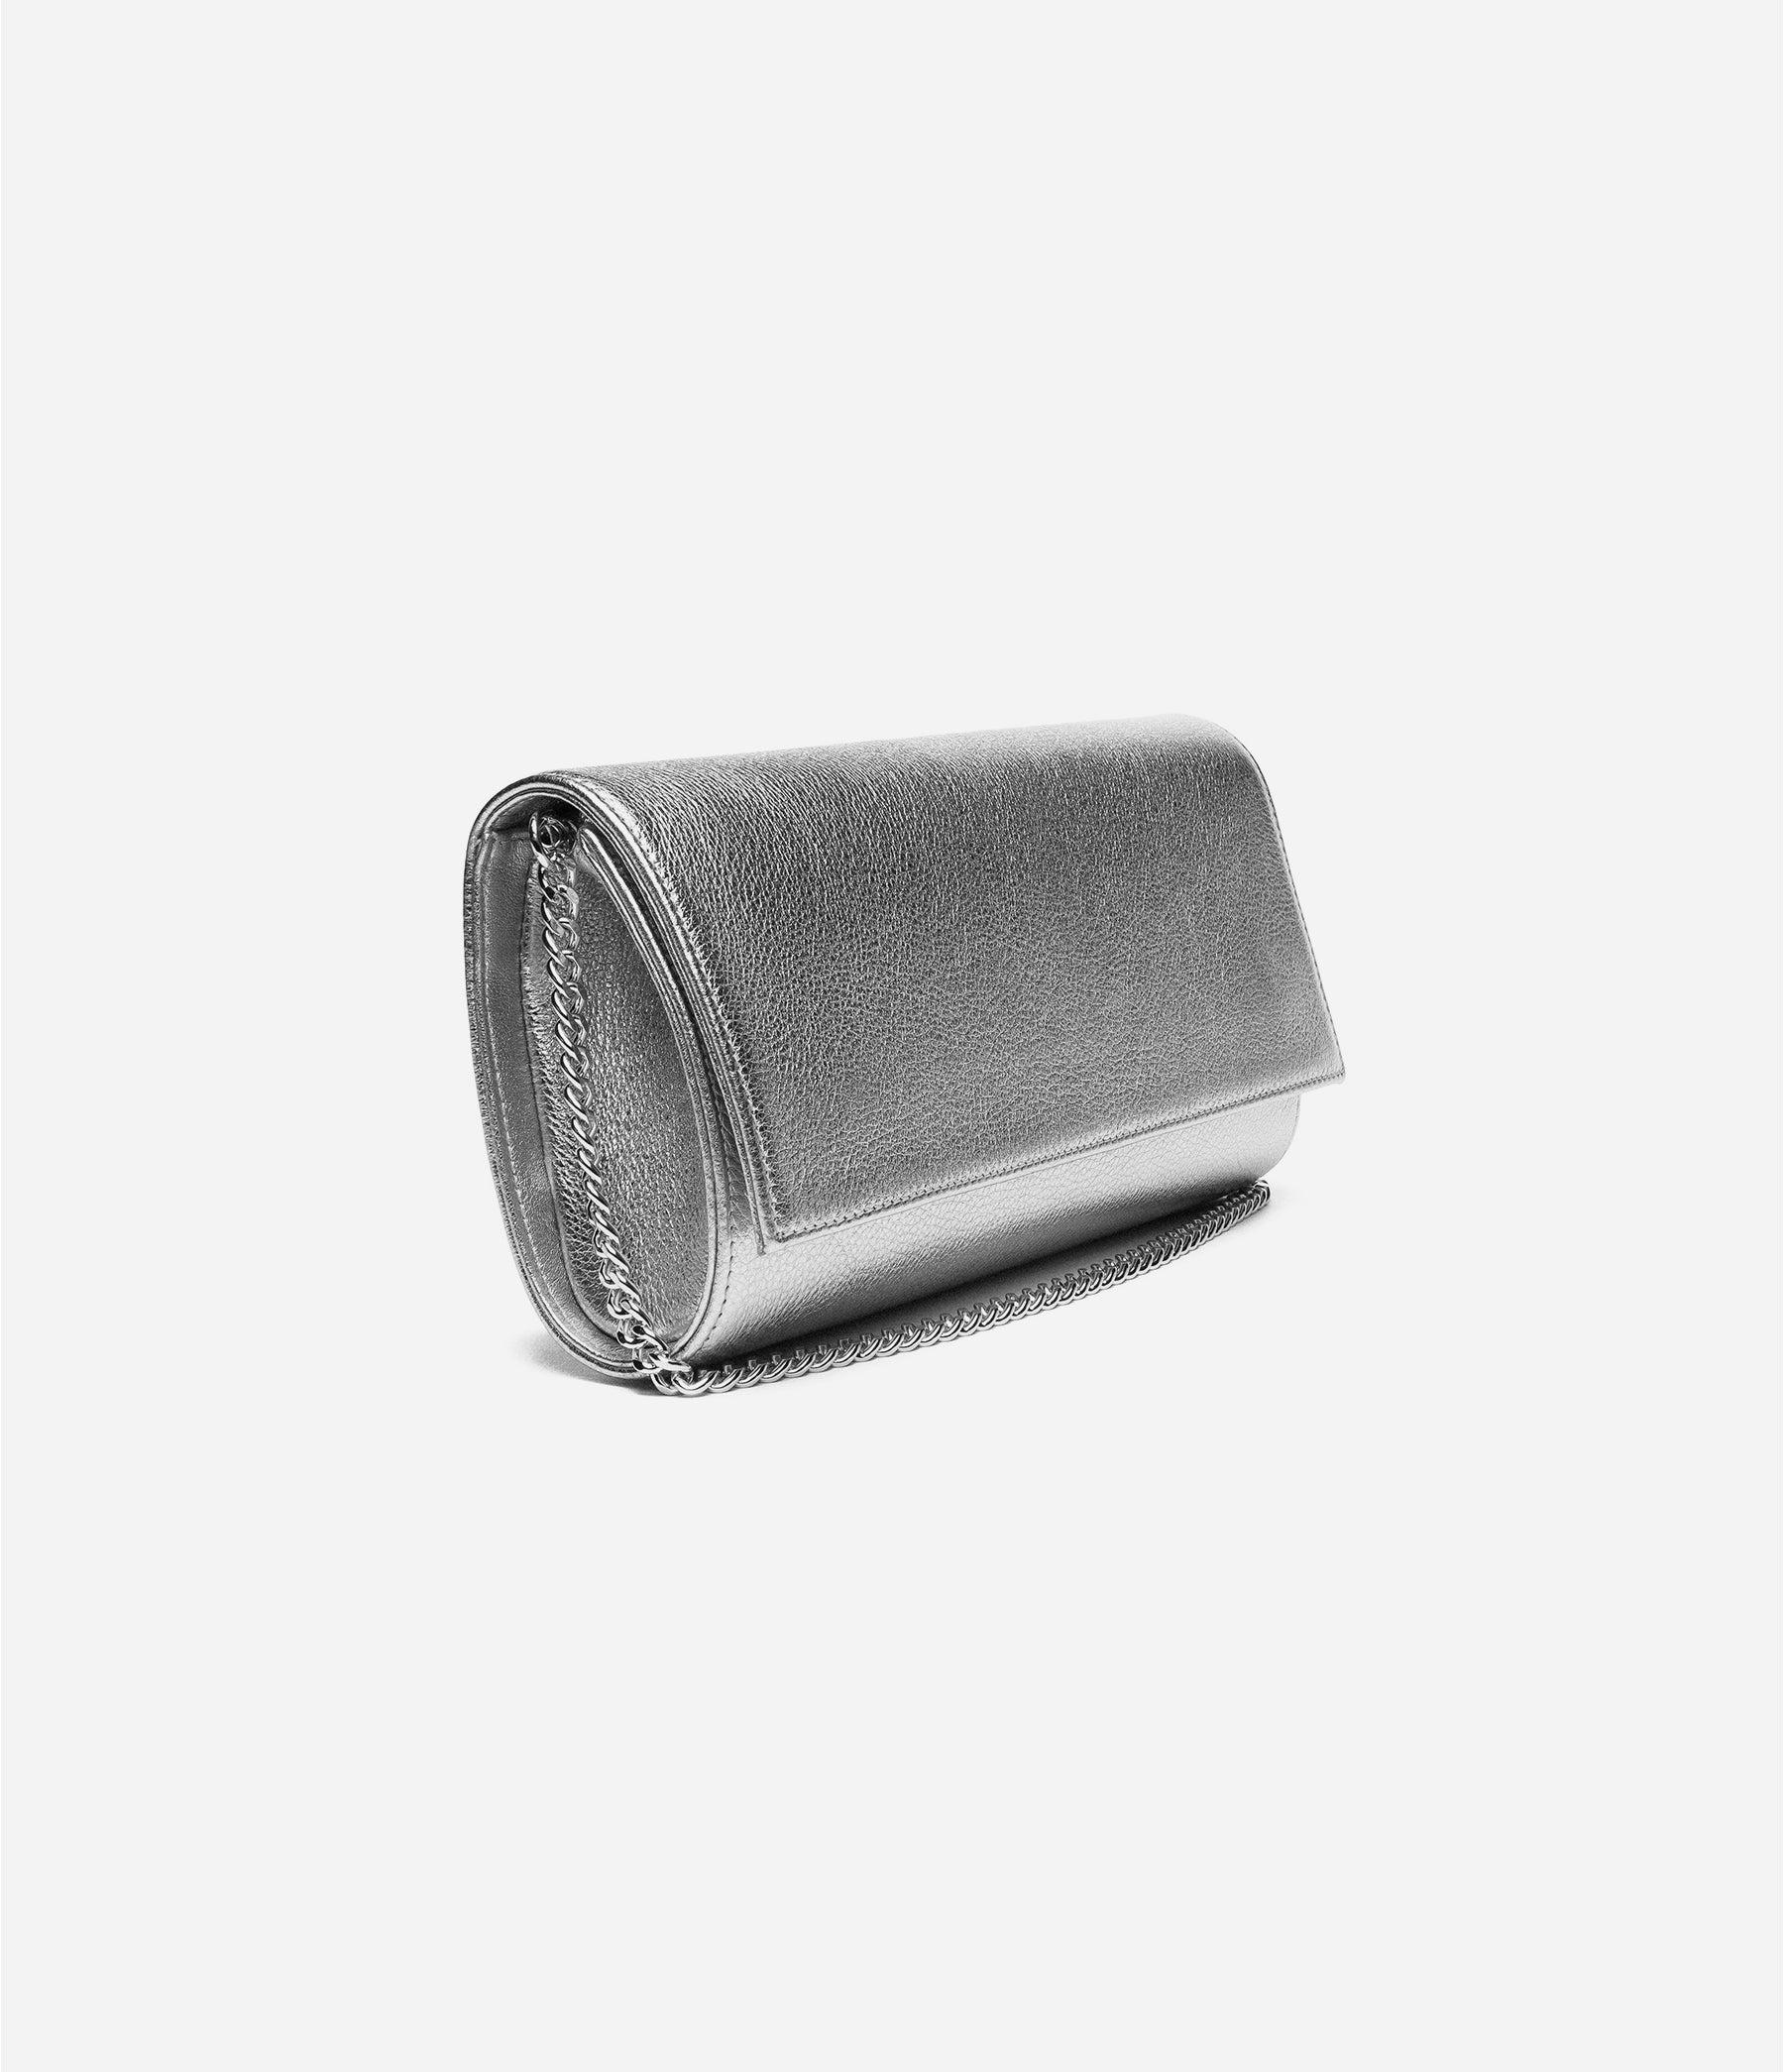 Lovard Leather Evening Clutch in Gray